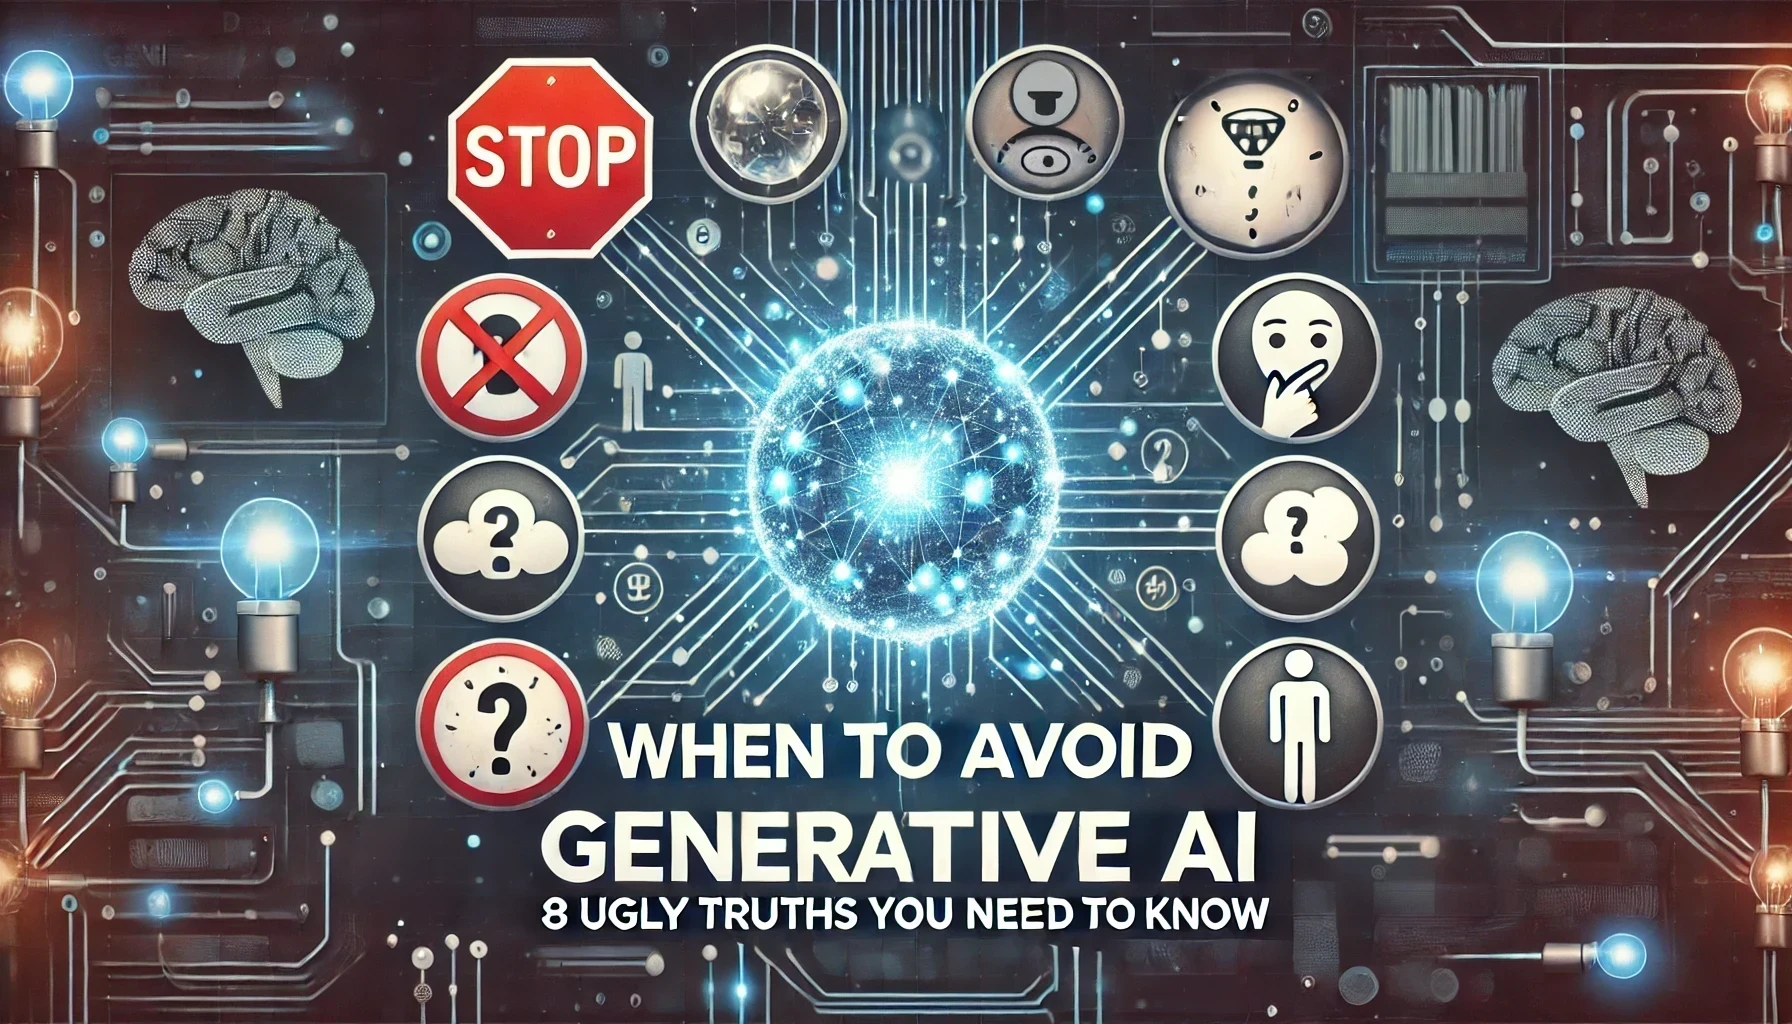 When to Avoid GenAI? Ugly Truths You Need to Know - digital illustration with centered text and icons representing the truths about Generative AI.